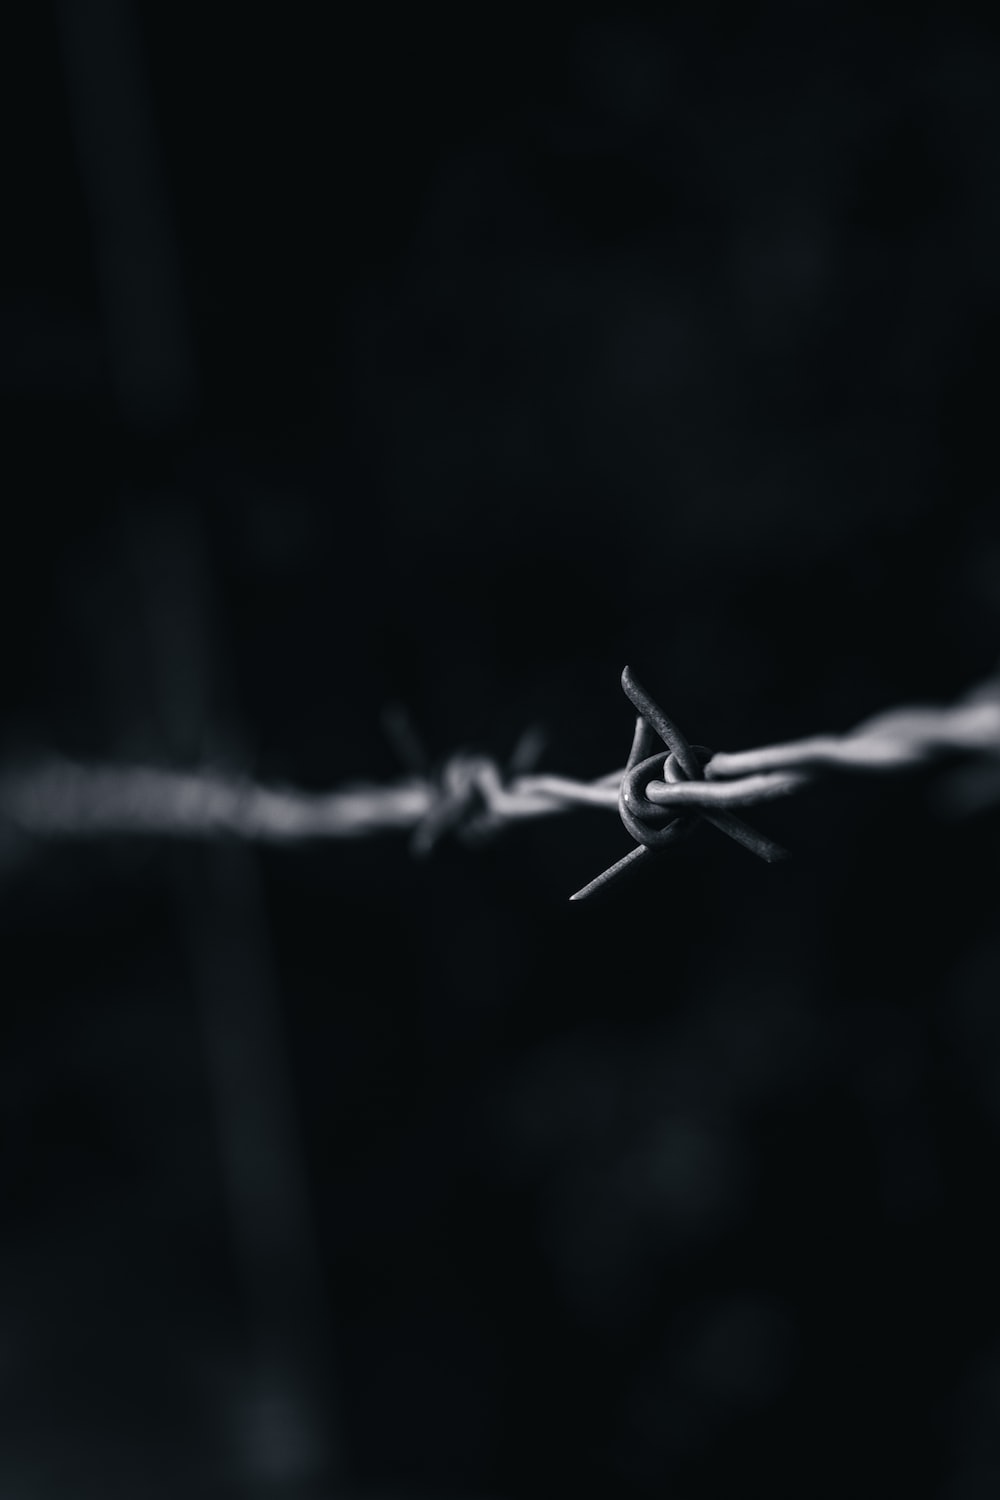 Barb Wire Wallpapers